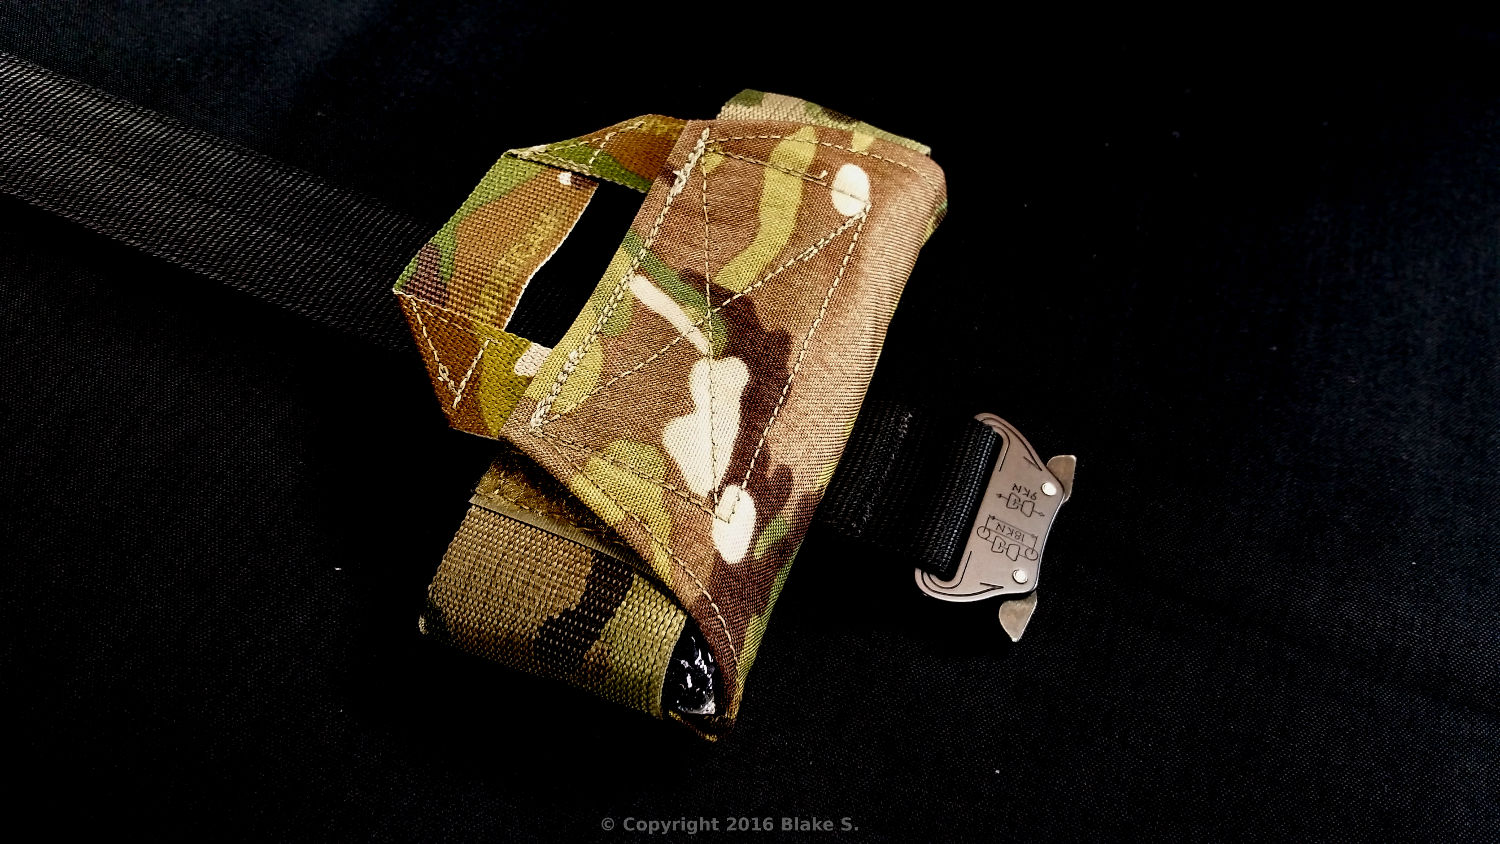 Omnimount Tourniquet Pouch by Omnitac. Can be mounted vertically, horizontally, Velcro, or on a belt. Shown in Multicam.